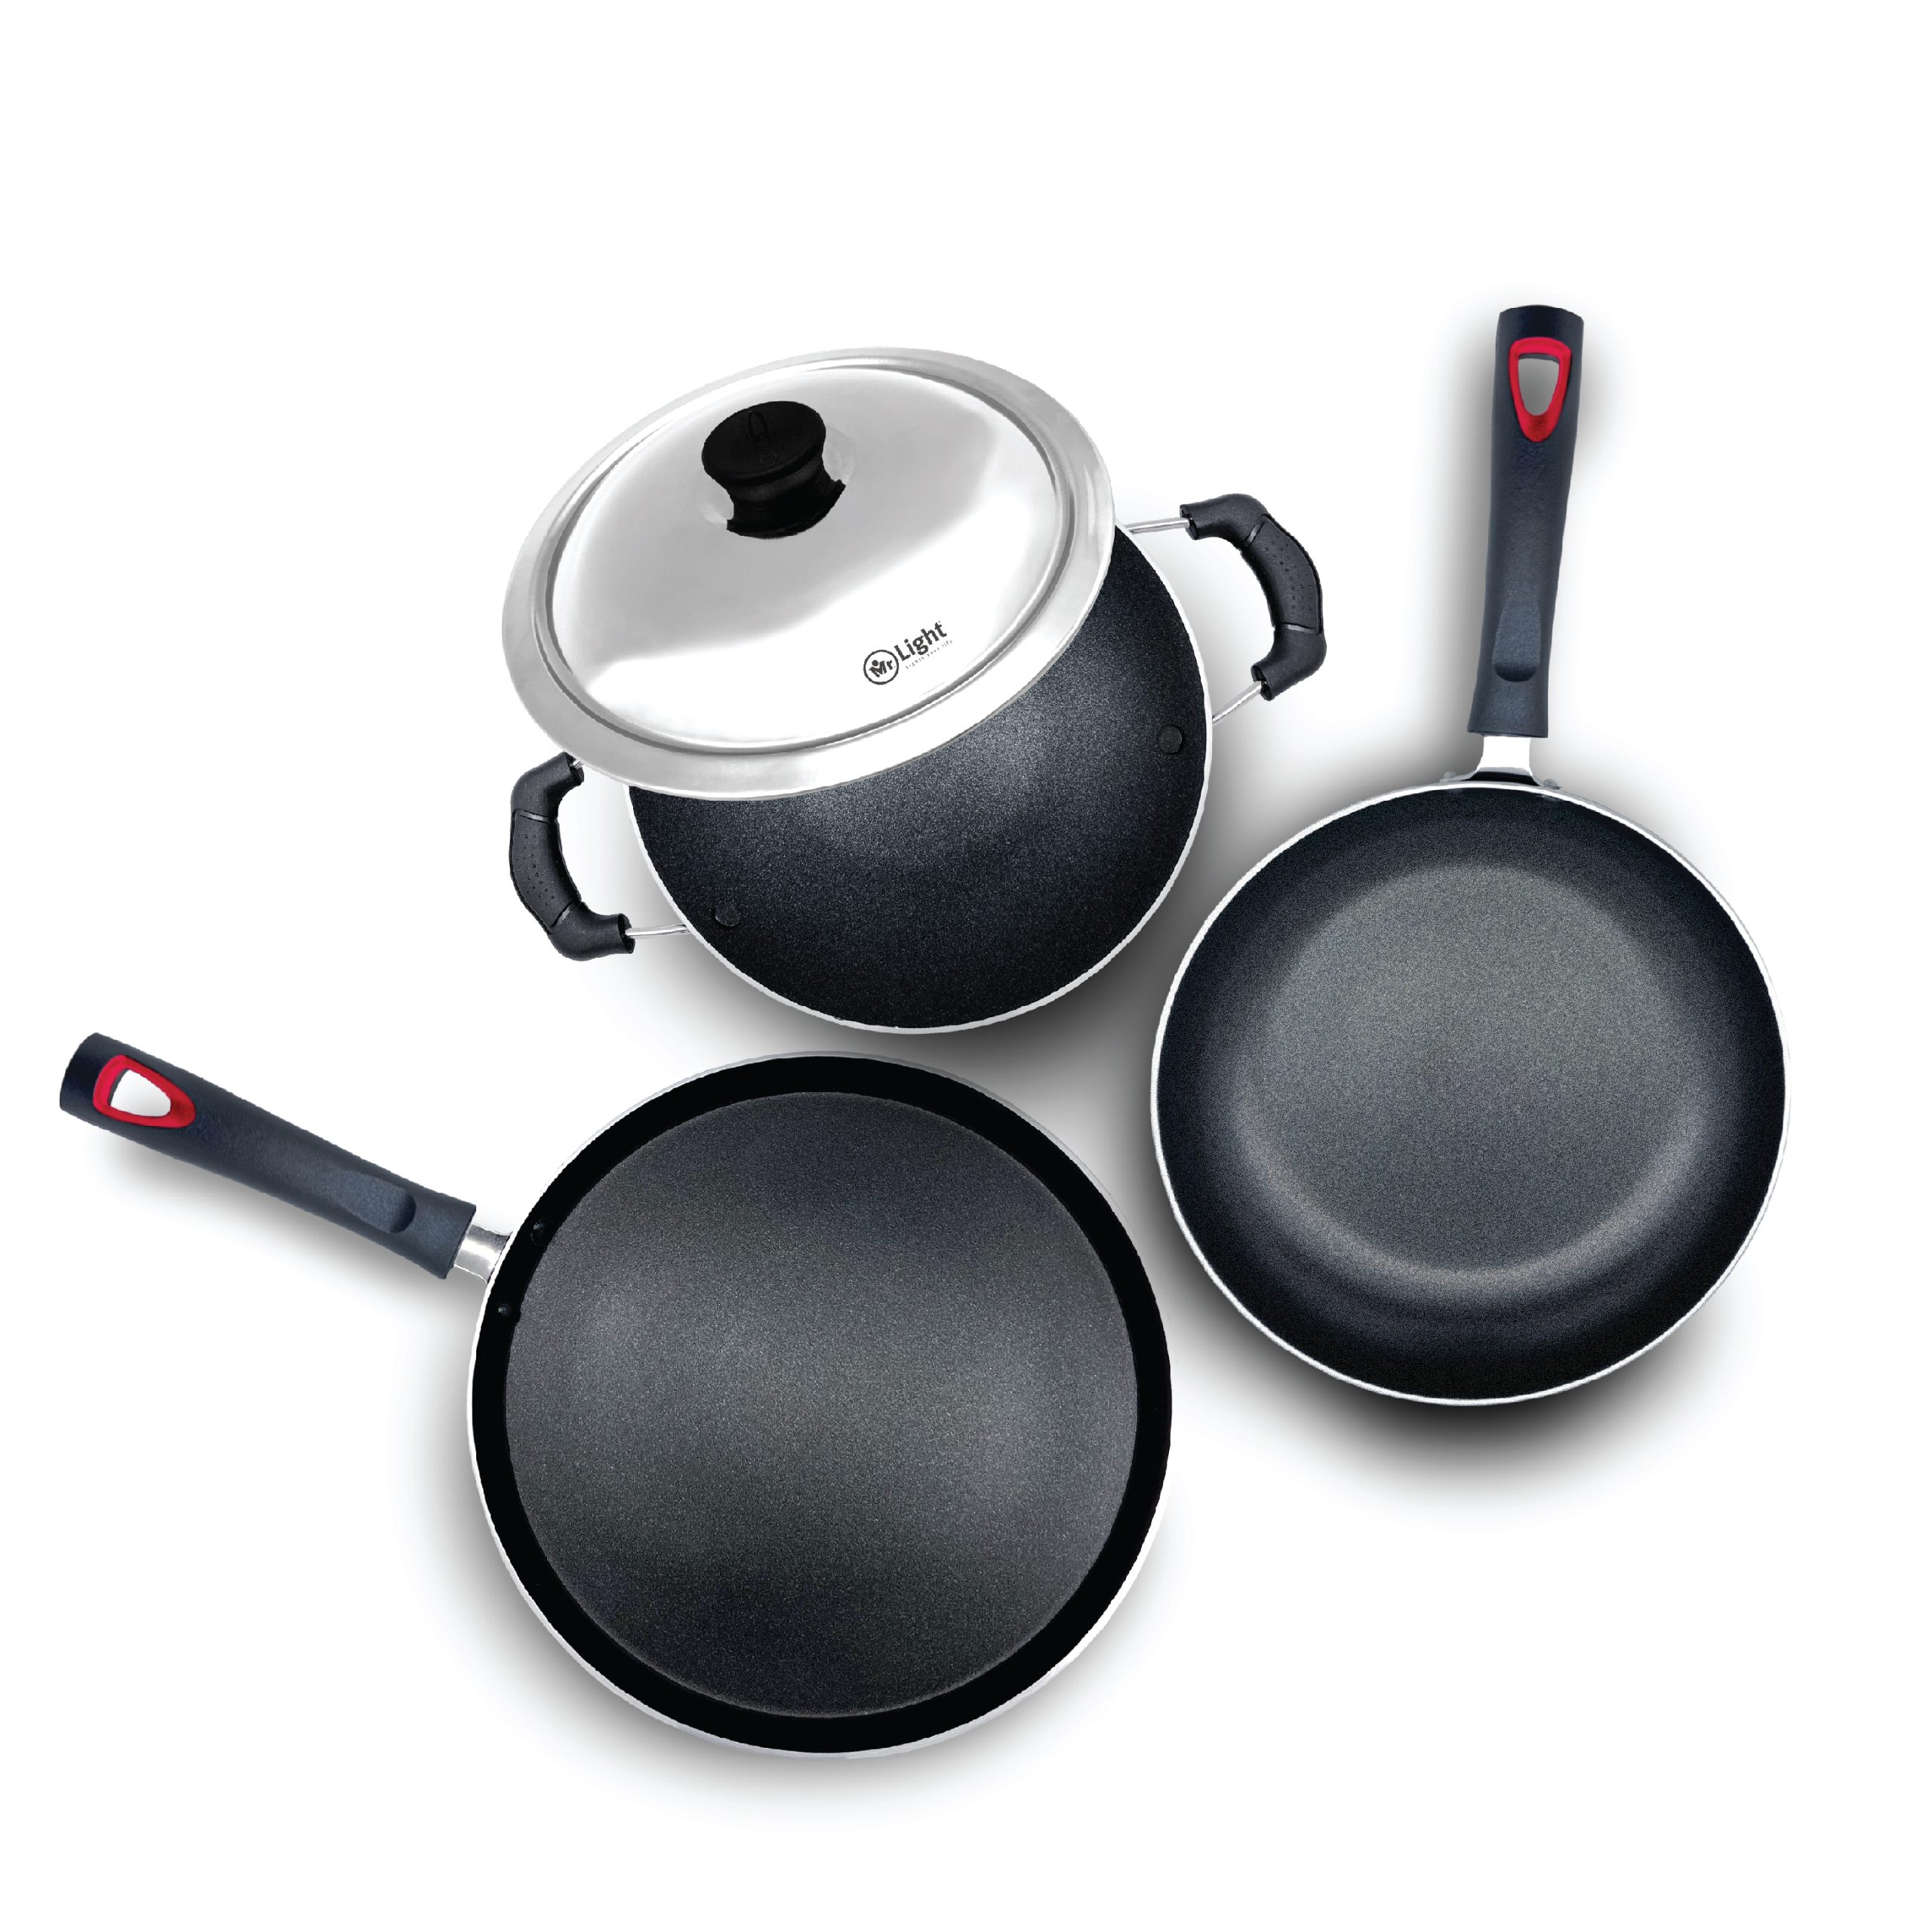 MR 7124 – 4 Pcs Non Stick combo Appachatty,Tawa and Frypan With SS Lid